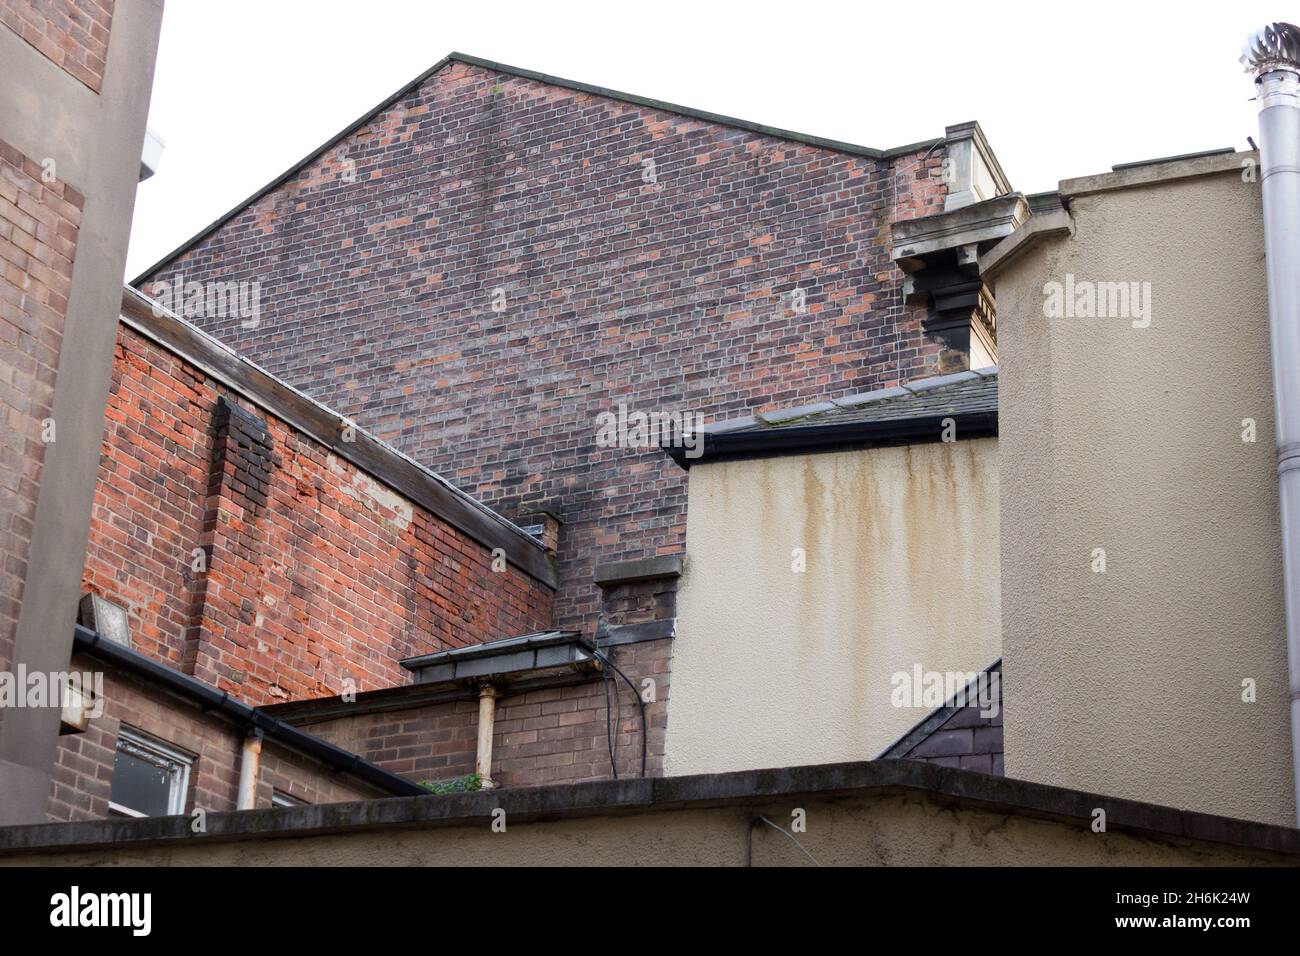 Many Buildings Together, Building Exterior, Architecture Stock Photo